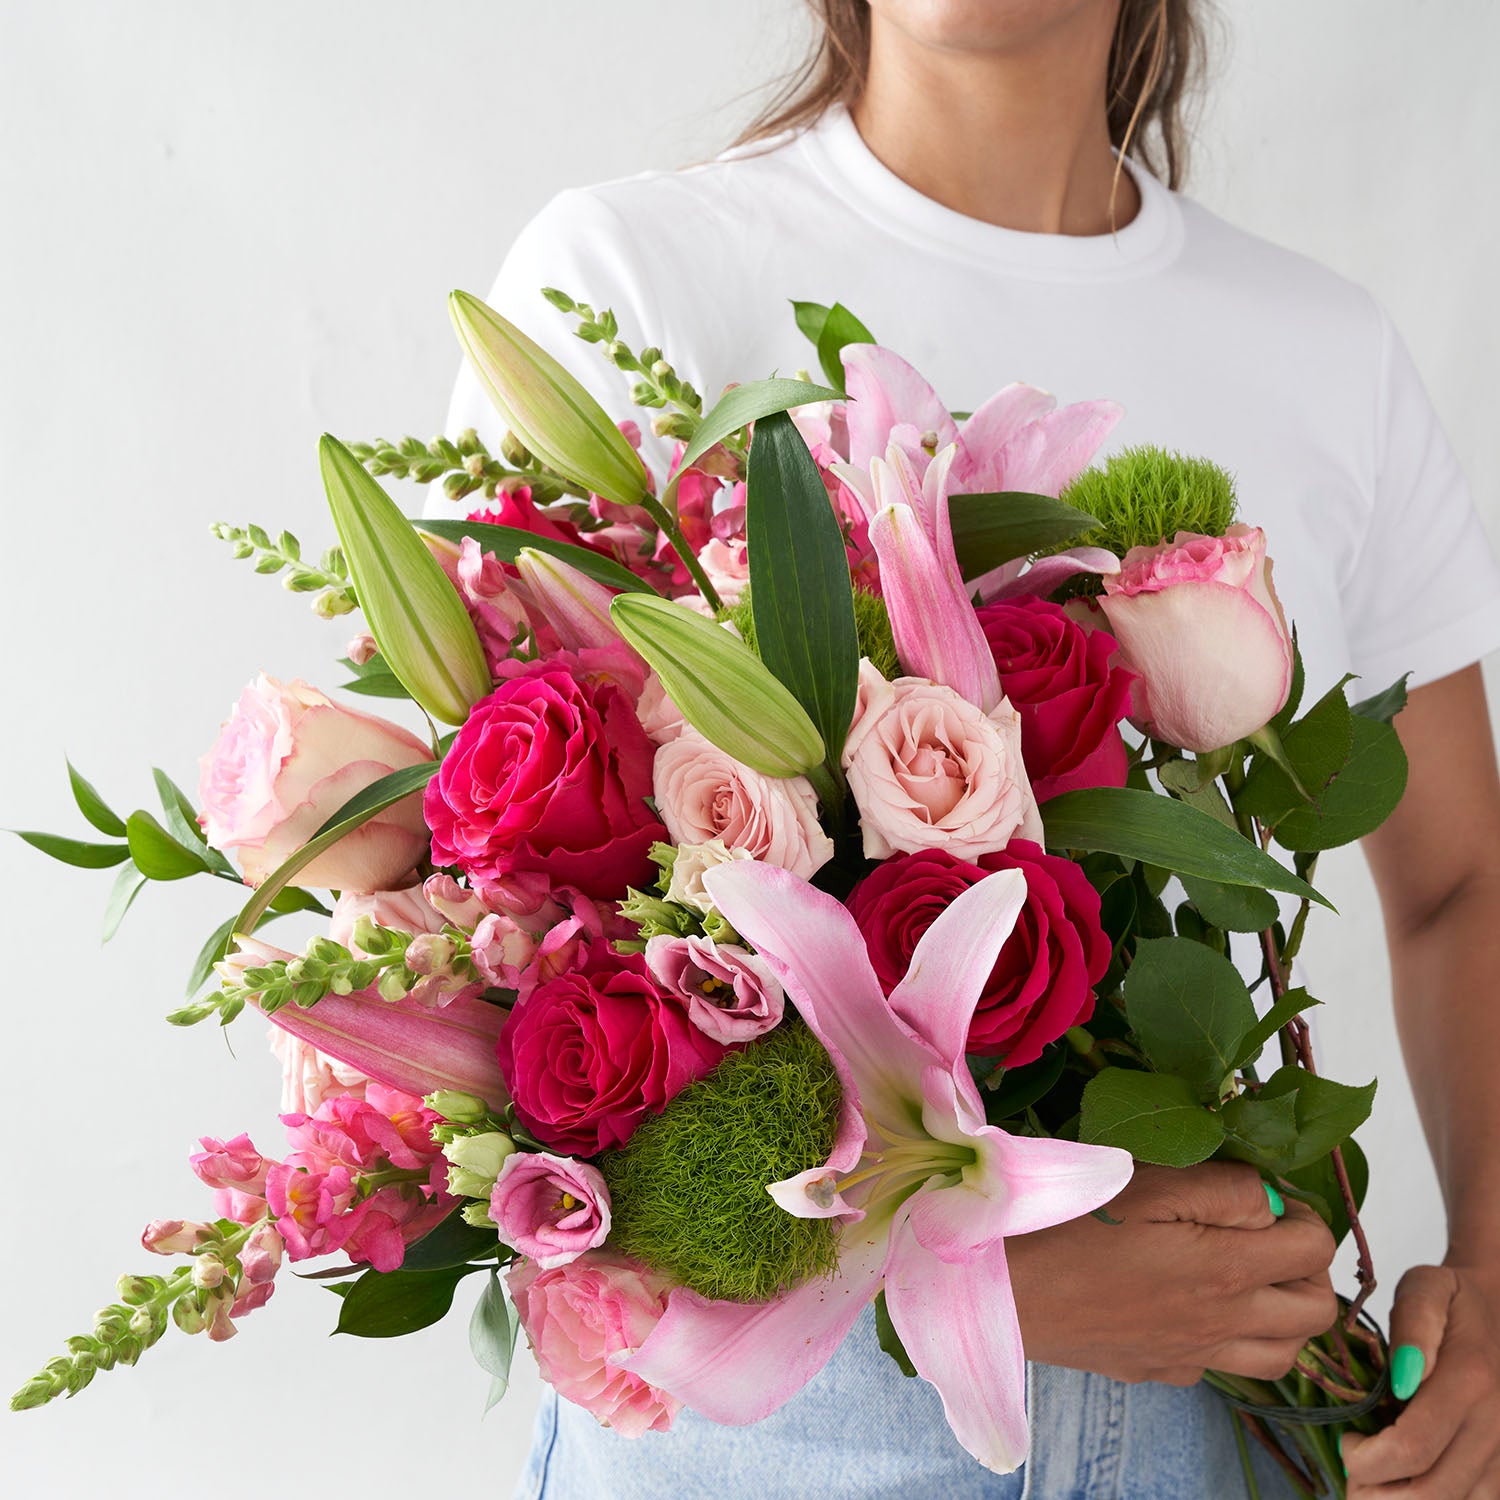 Woman in white t-shirt and jeans holding large bouquet of pink flowers.